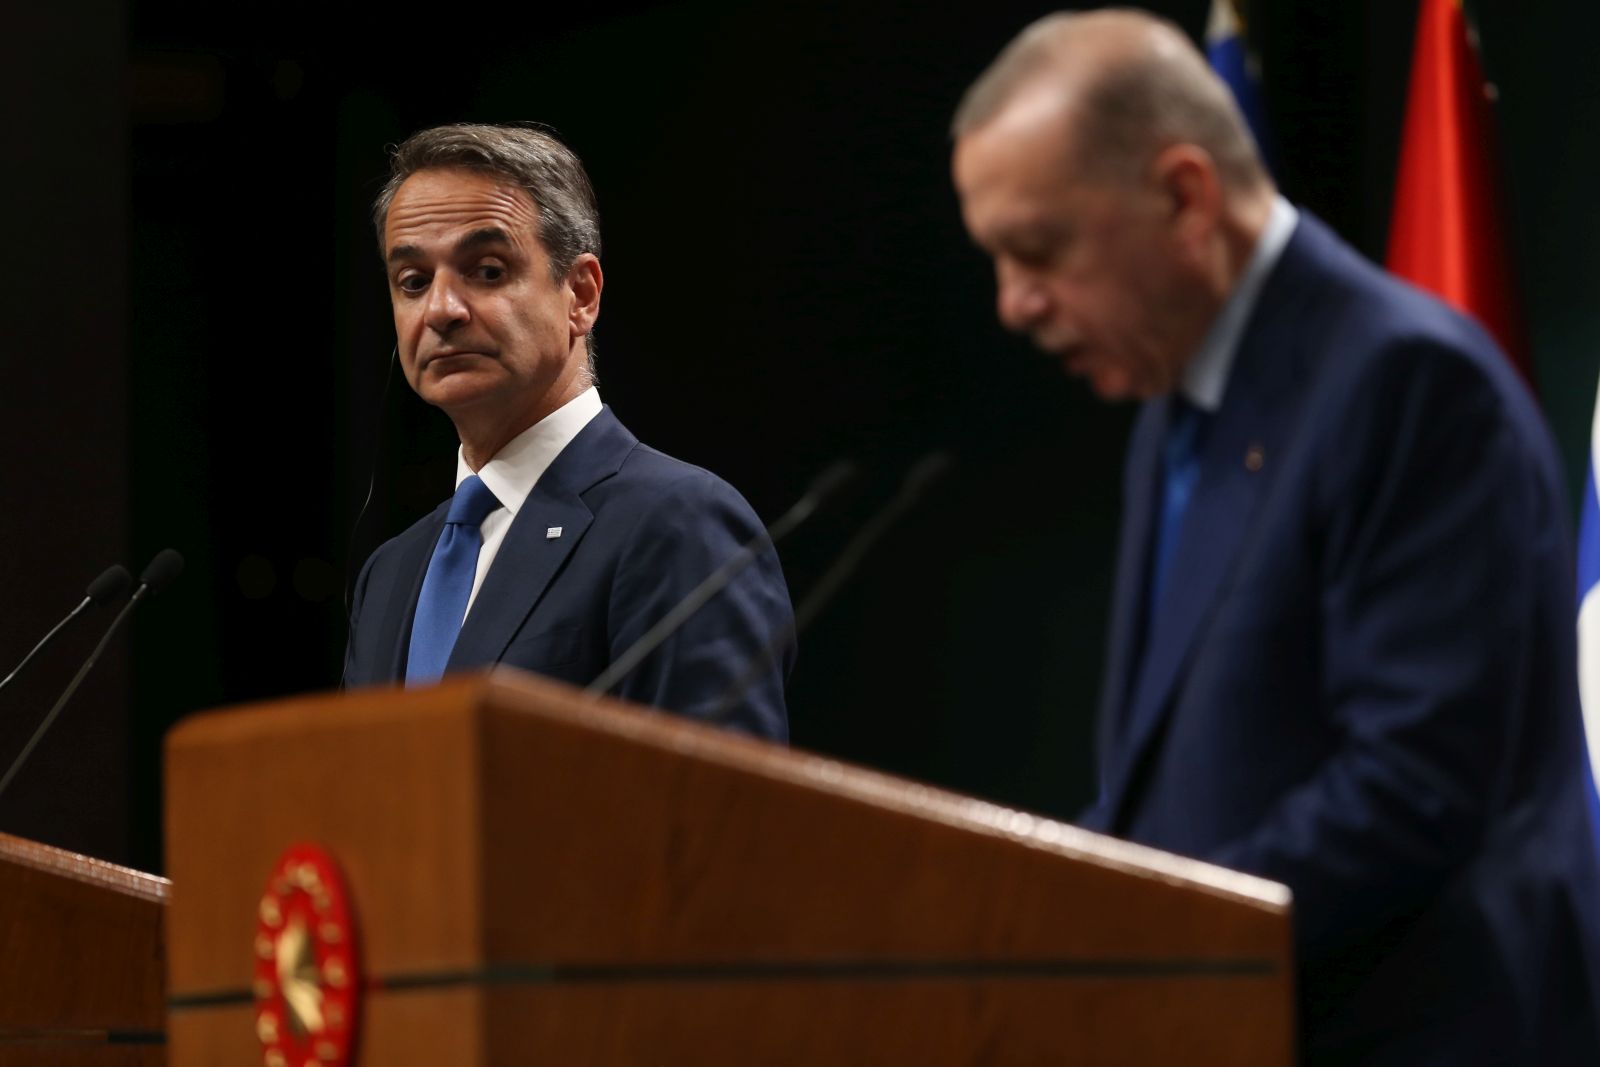 epa11337396 Greek Prime Minister Kyriakos Mitsotakis (L) looks on during a press conference withTurkish President Recep Tayyip Erdogan (R) after their meeting at the Presidential Palace in Ankara, Turkey, 13 May 2024.  EPA/NECATI SAVAS